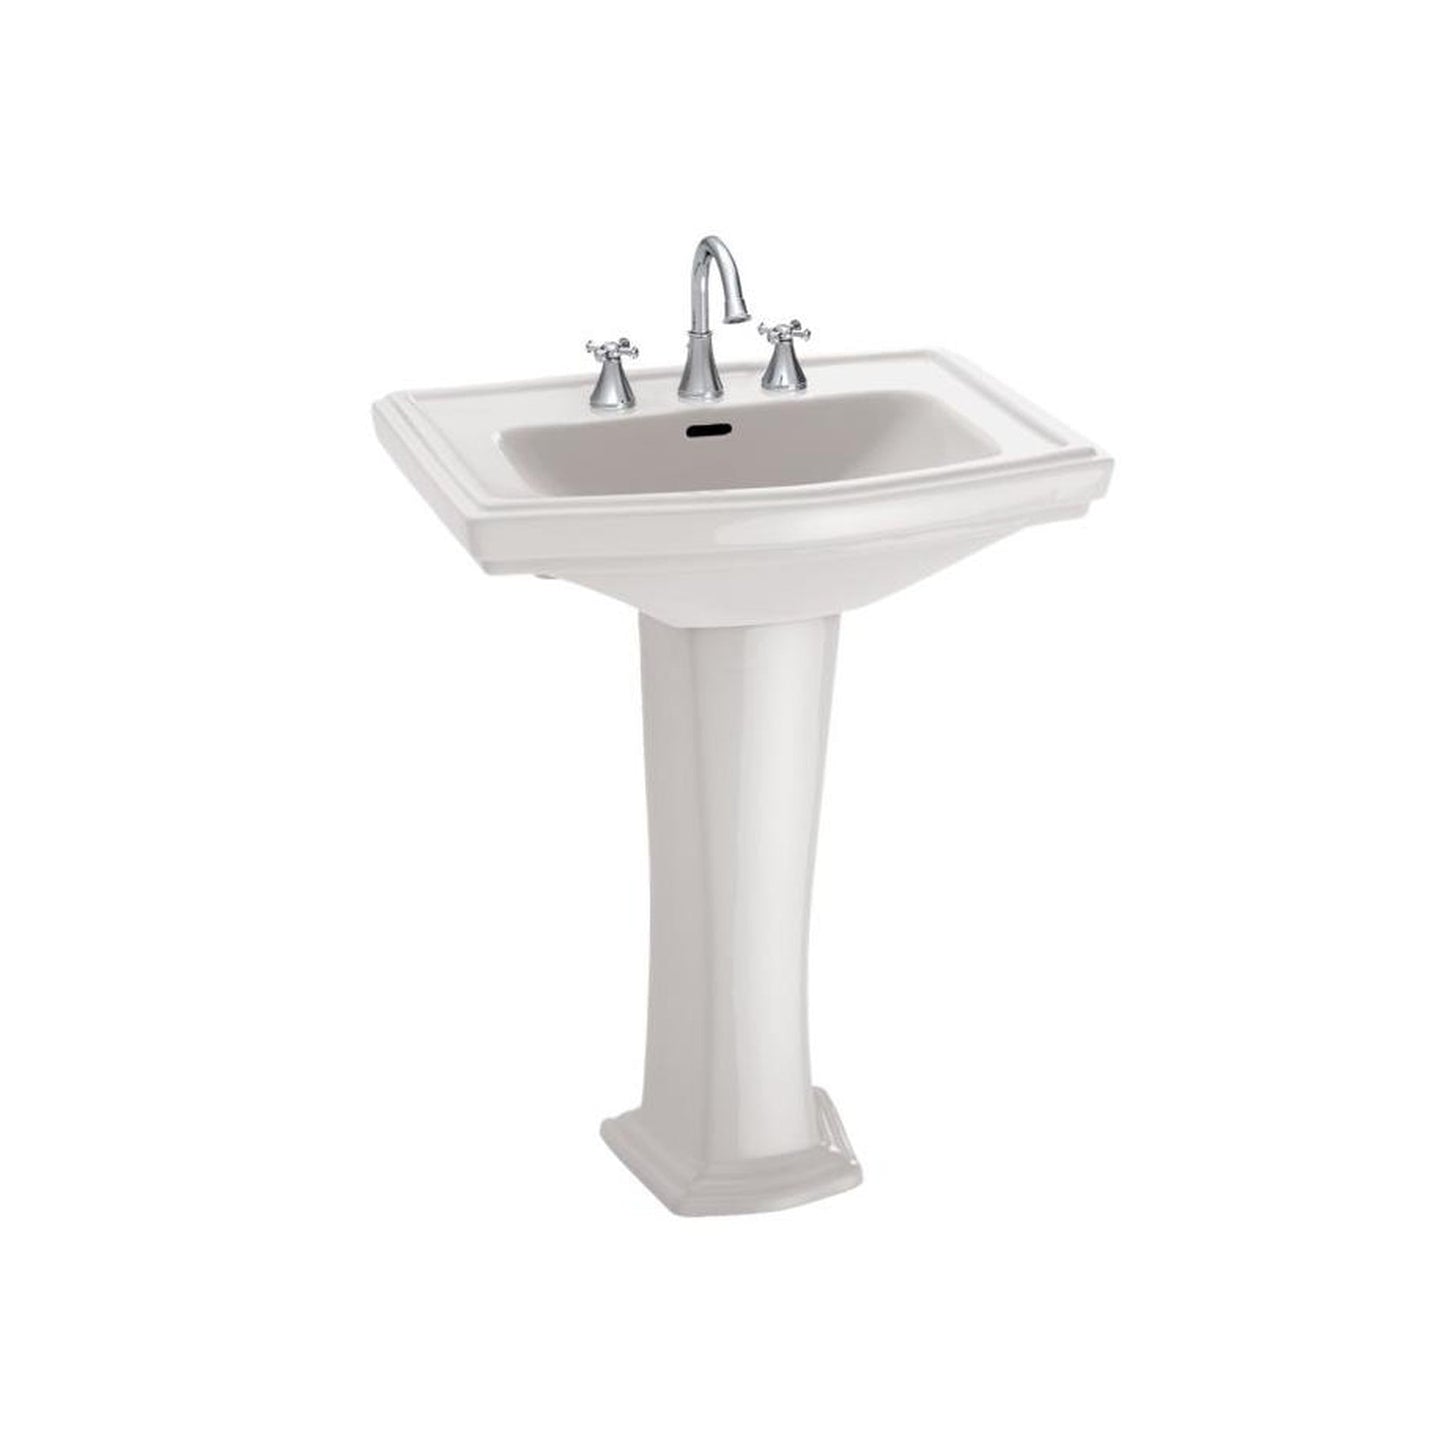 Toto Clayton 1-Hole Lav & Ped Colonial White